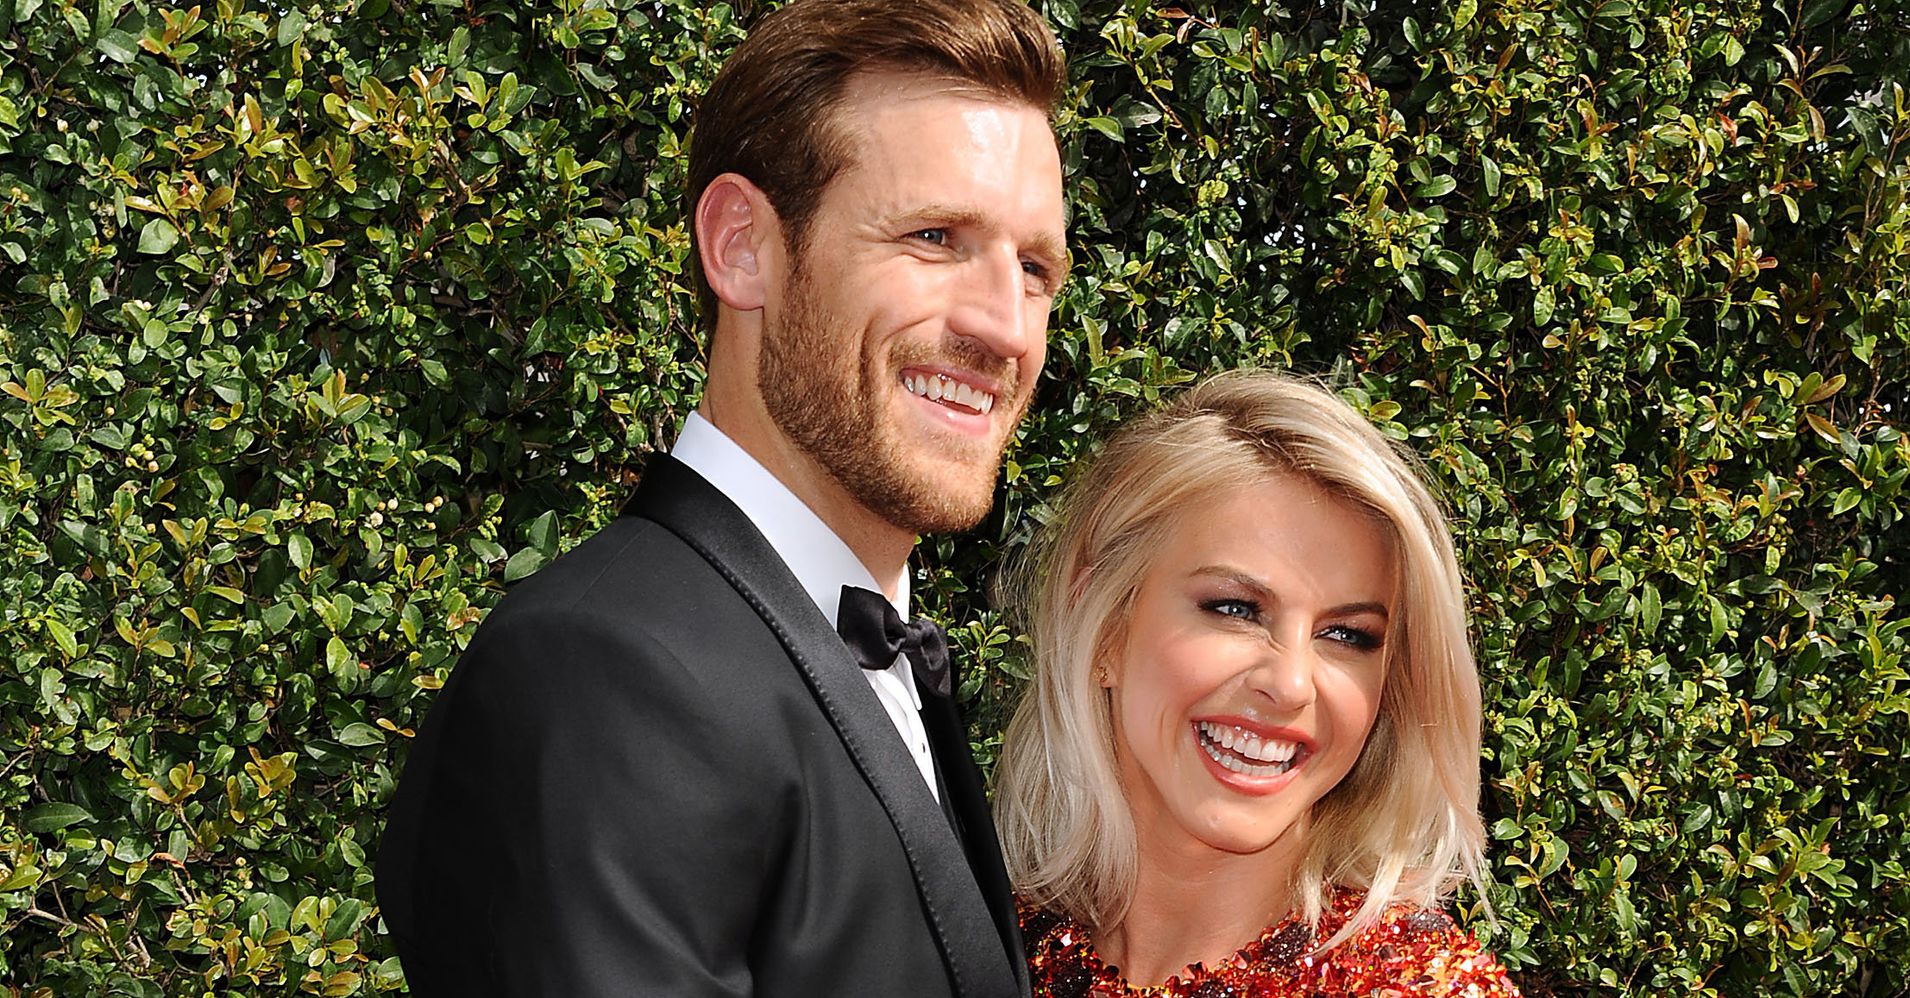 Julianne Hough And Brooks Laich Get Married In Idaho Ceremony | HuffPost